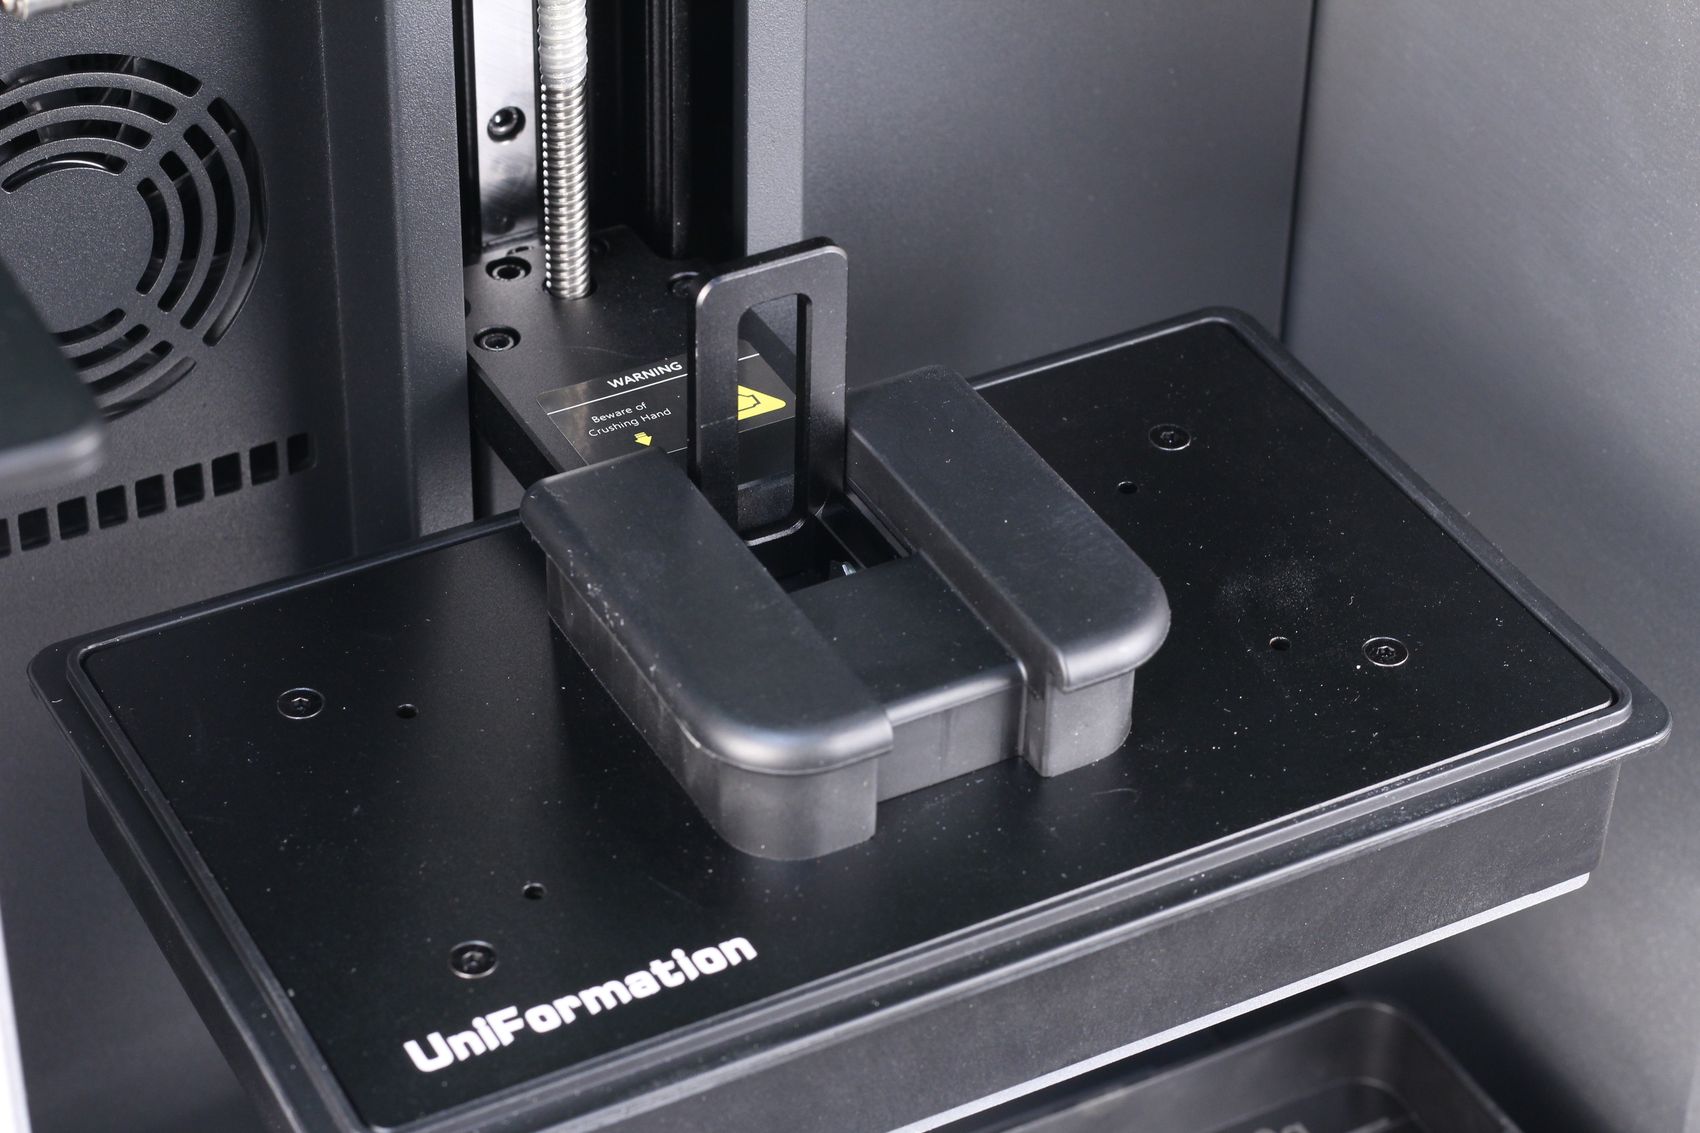 Quick Release System on UniFormation resin 3d printer2 | UniFormation GKTWO Review: With W230 and D265 Post Processing Kit